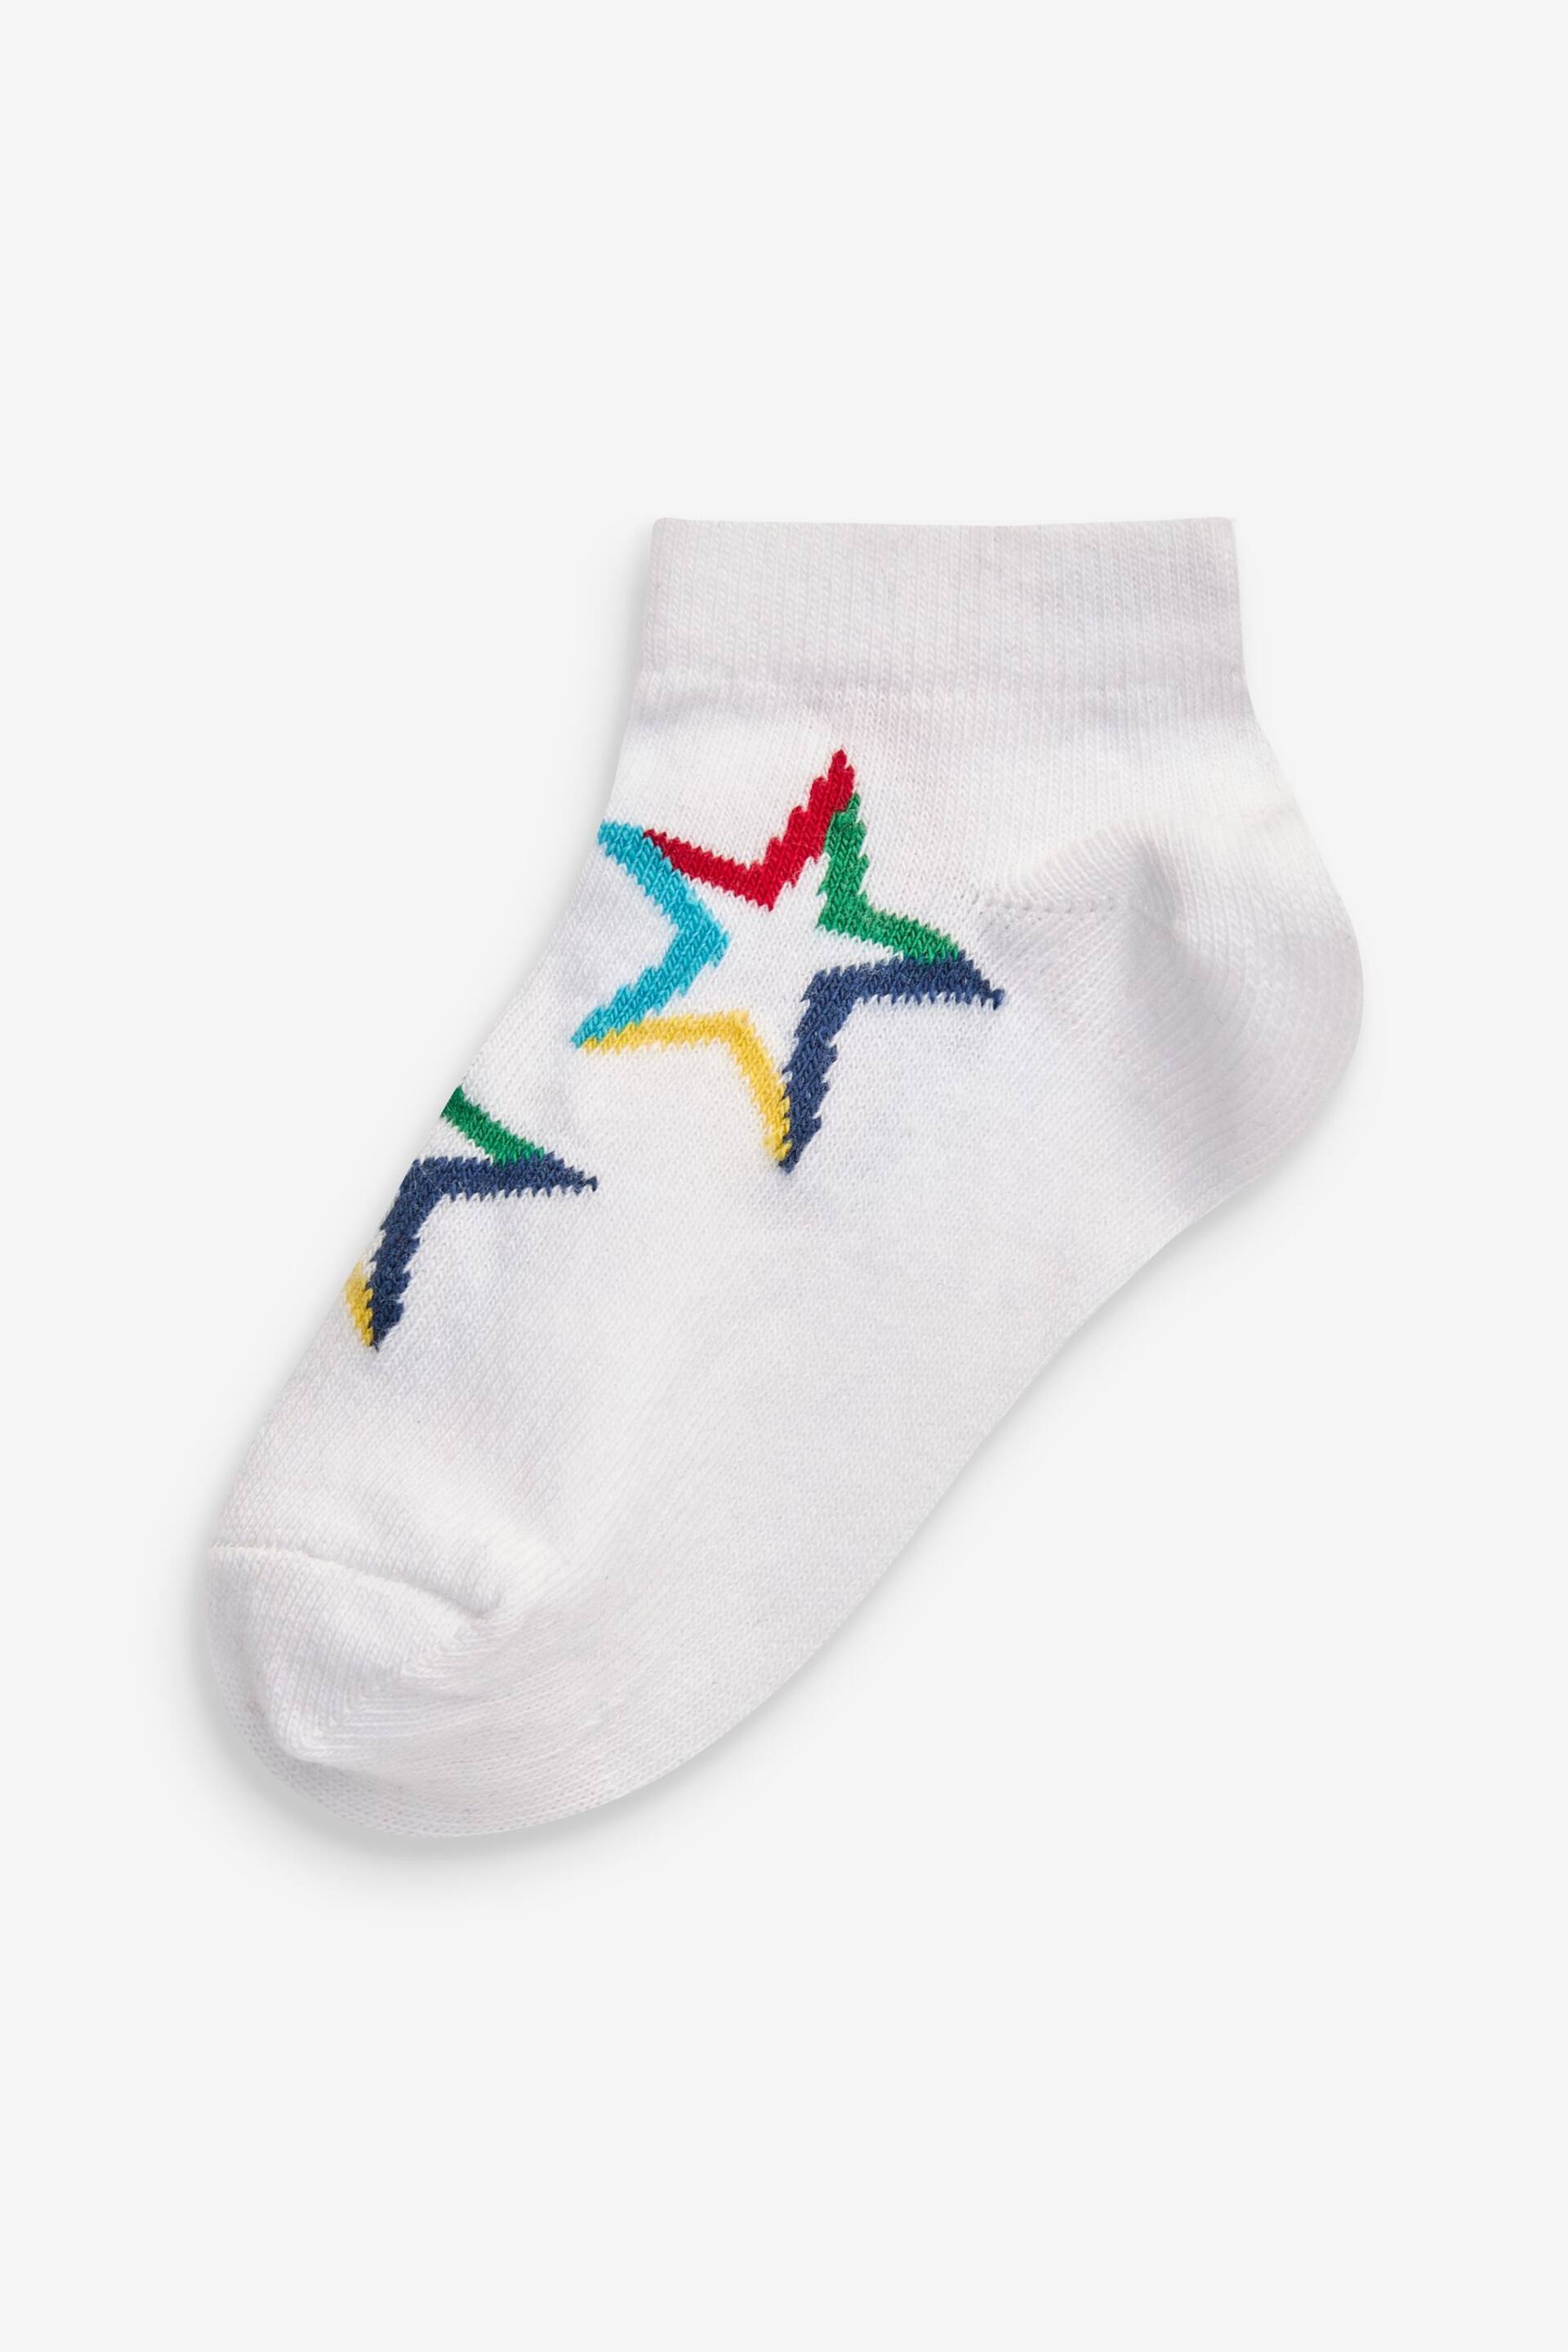 White/Blue/Red Star Cotton Rich Trainer Socks 7 Pack - Image 2 of 8